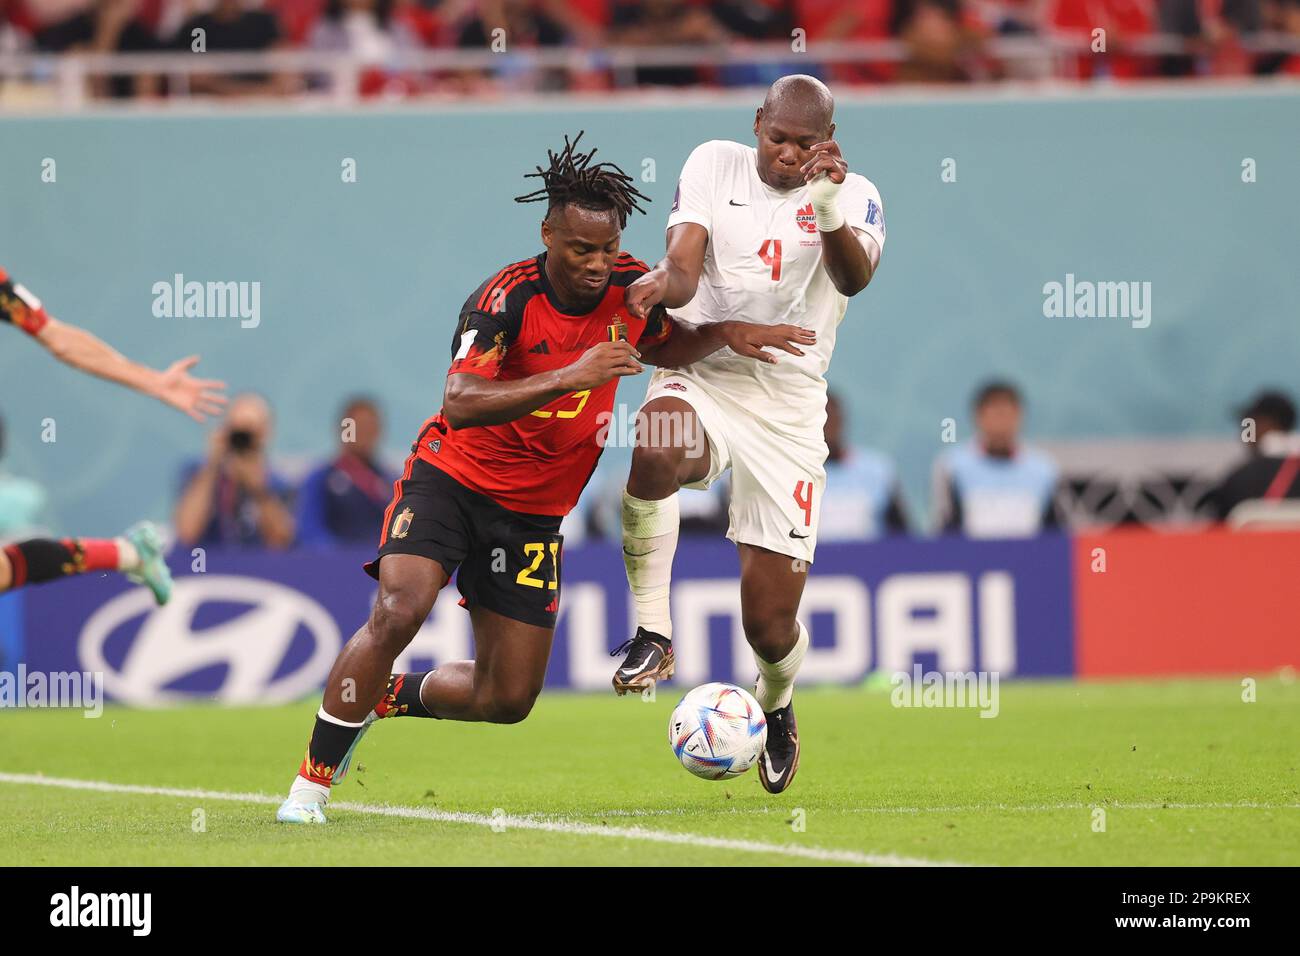 Michy Batshuayi of Belgium (L) and Kamal Miller of Canada (R) in action during the FIFA World Cup Qatar 2022, Match between Belgium and Canada at Ahmad Bin Ali Stadium. Final score; Belgium 1:0 Canada. Stock Photo